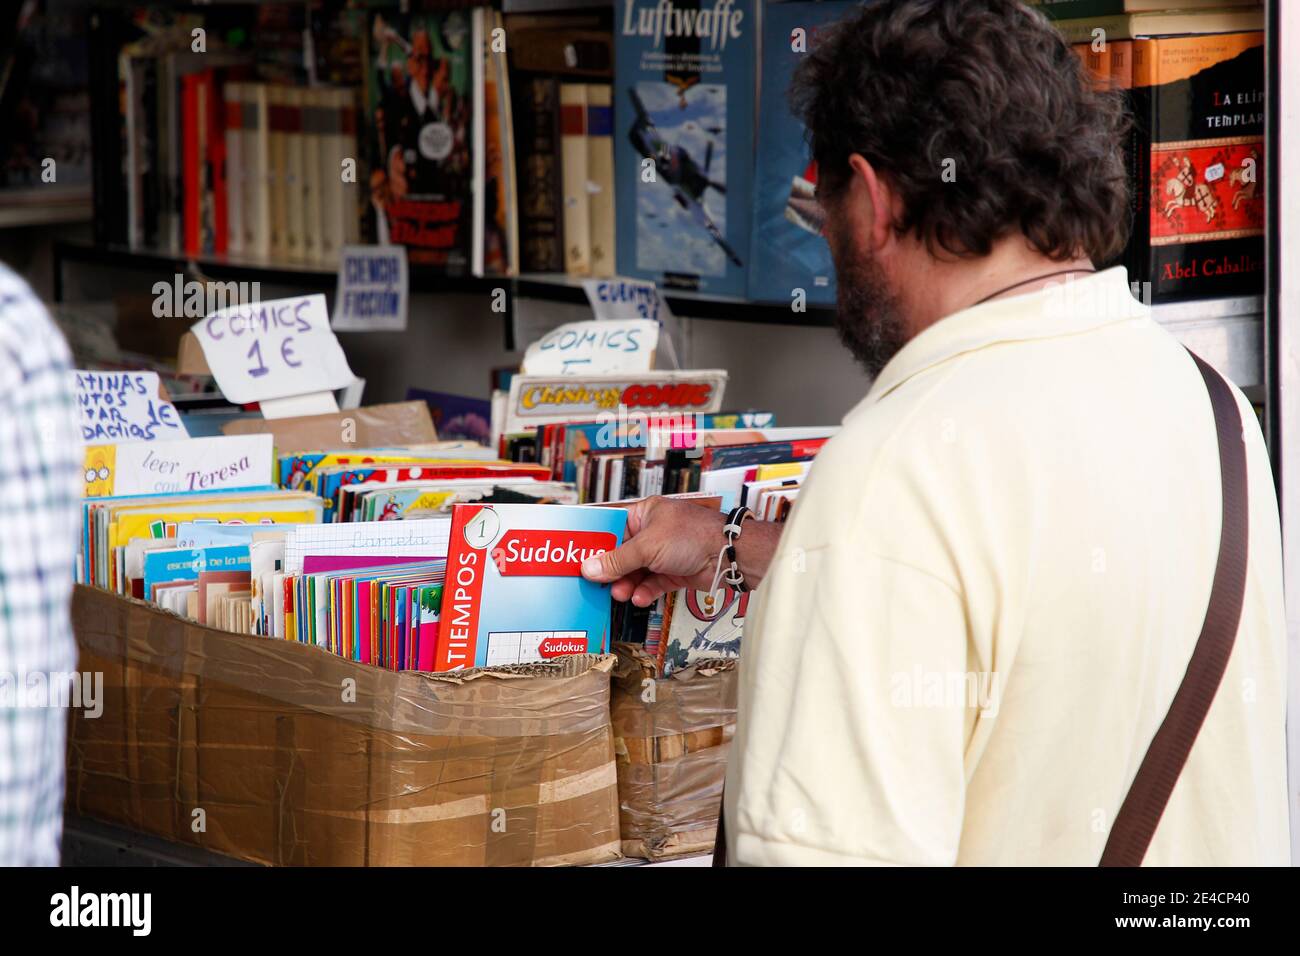 Coruna-Spain. Man catching a sudoku game in a second-hand book store during a specialized fair on August 19, 2019 Stock Photo